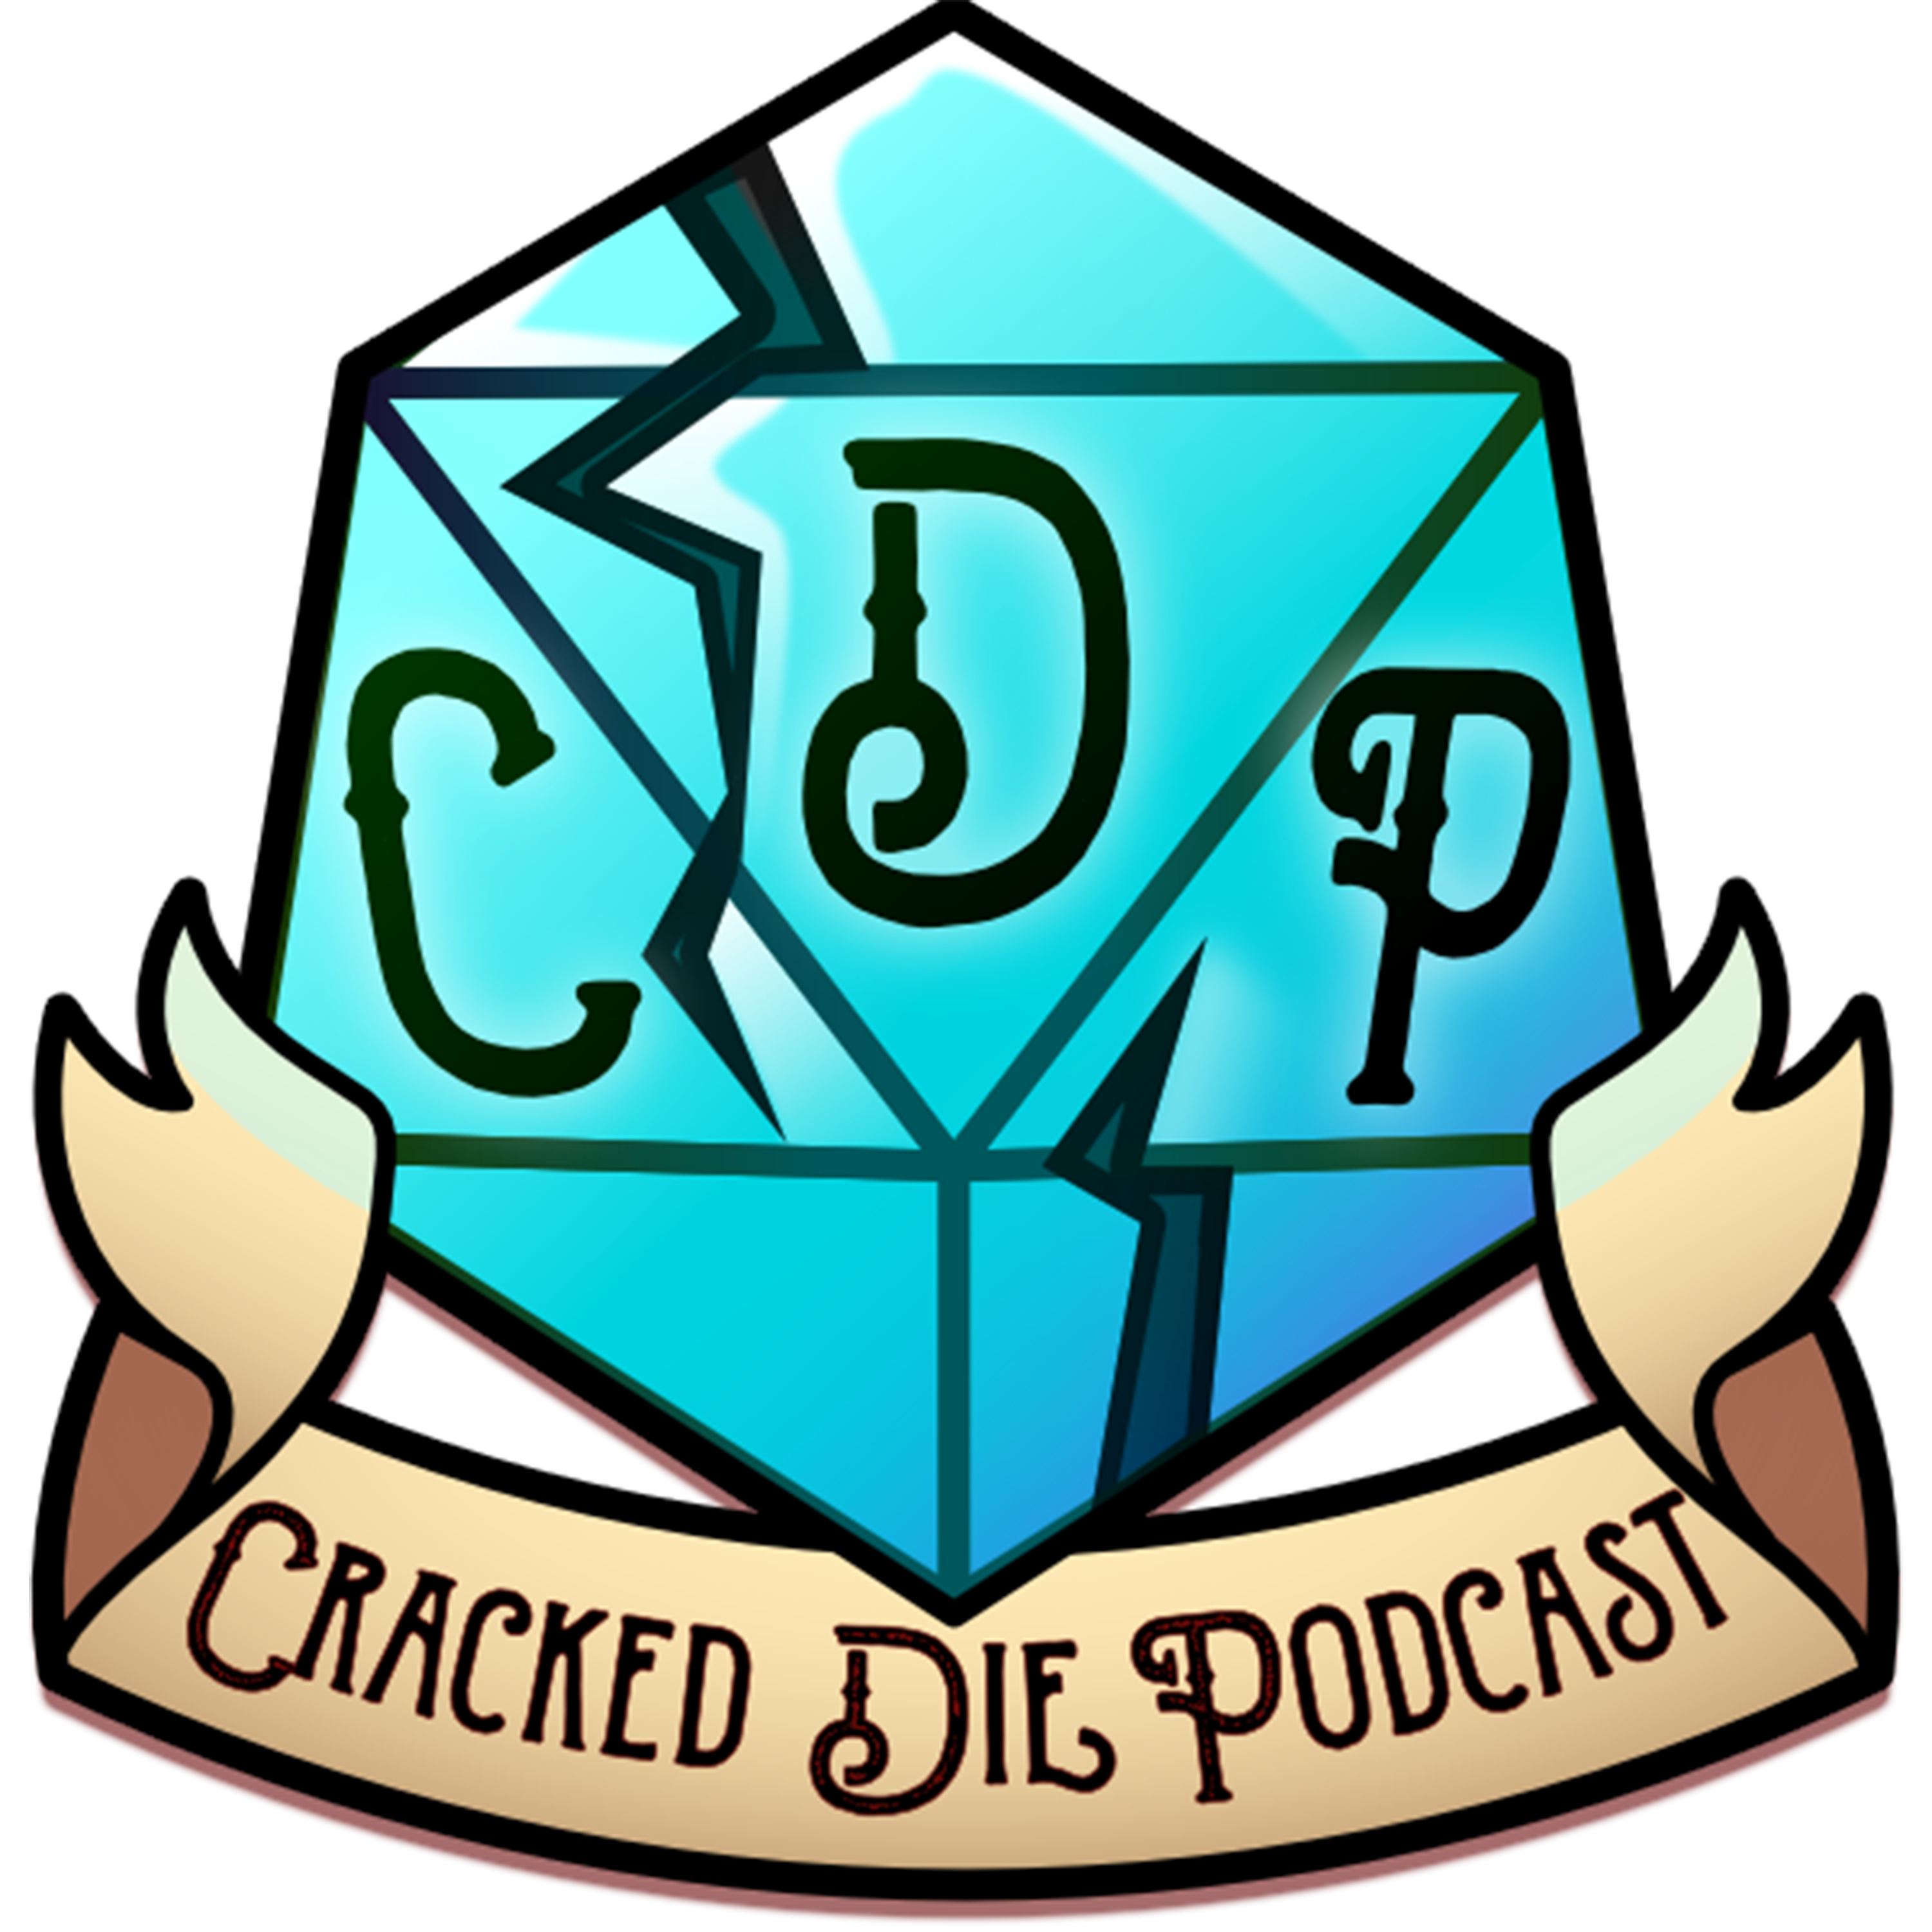 The Cracked Die Podcast - Episode 176 - Rock n' Me